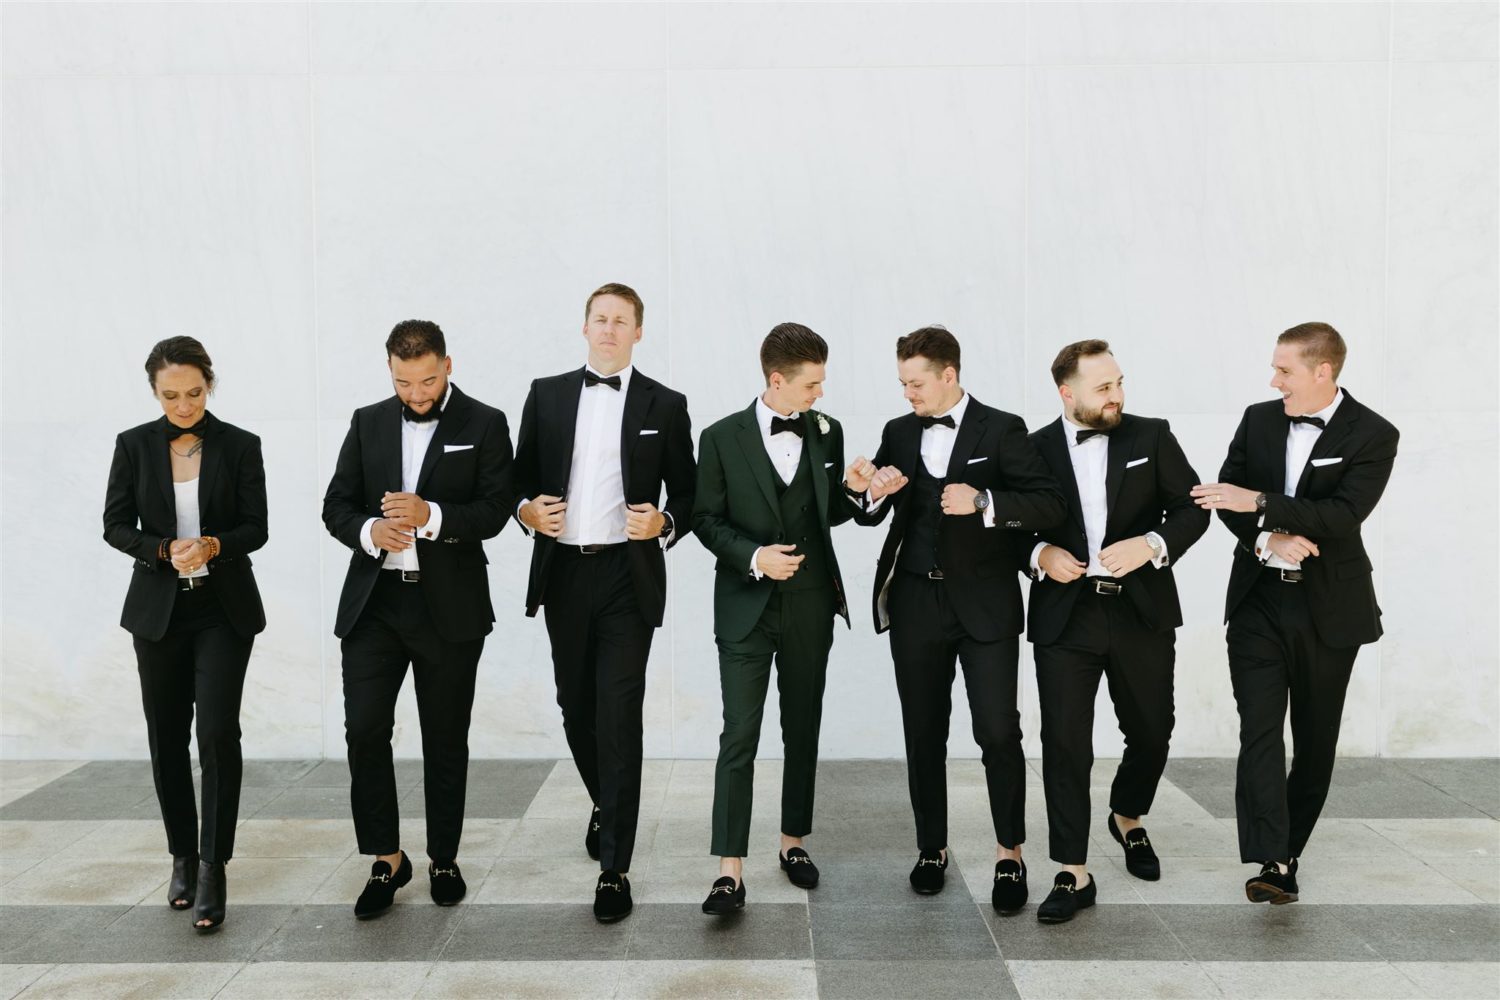 colorful accent groom suit black and green unique bridal party styles